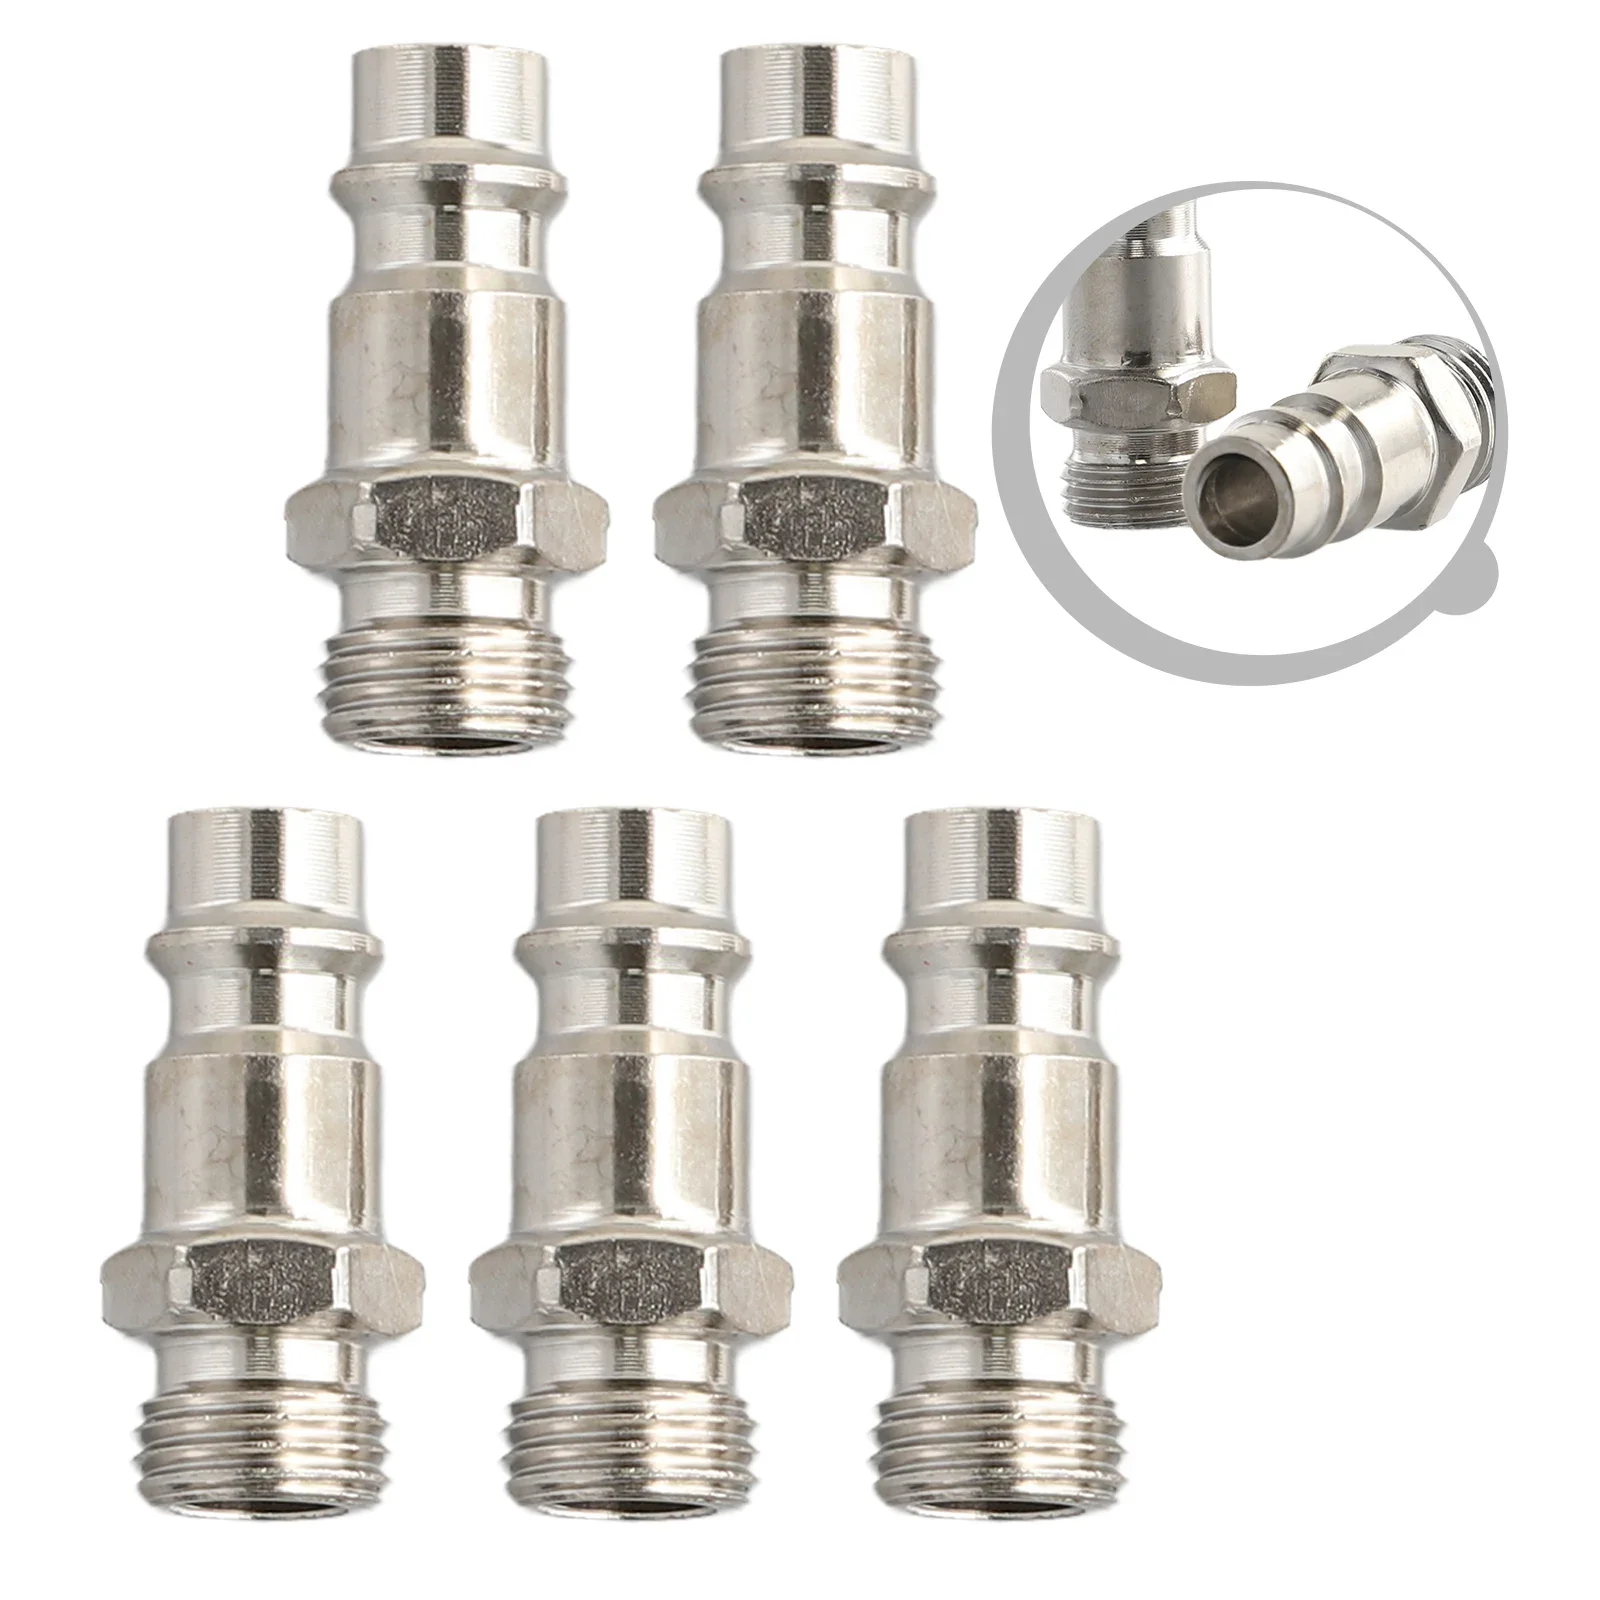 

5x Quick Release Euro Compressed Air Line Coupler Connector Fitting 1/4in Male Workshop Equipment Power Air Compressor